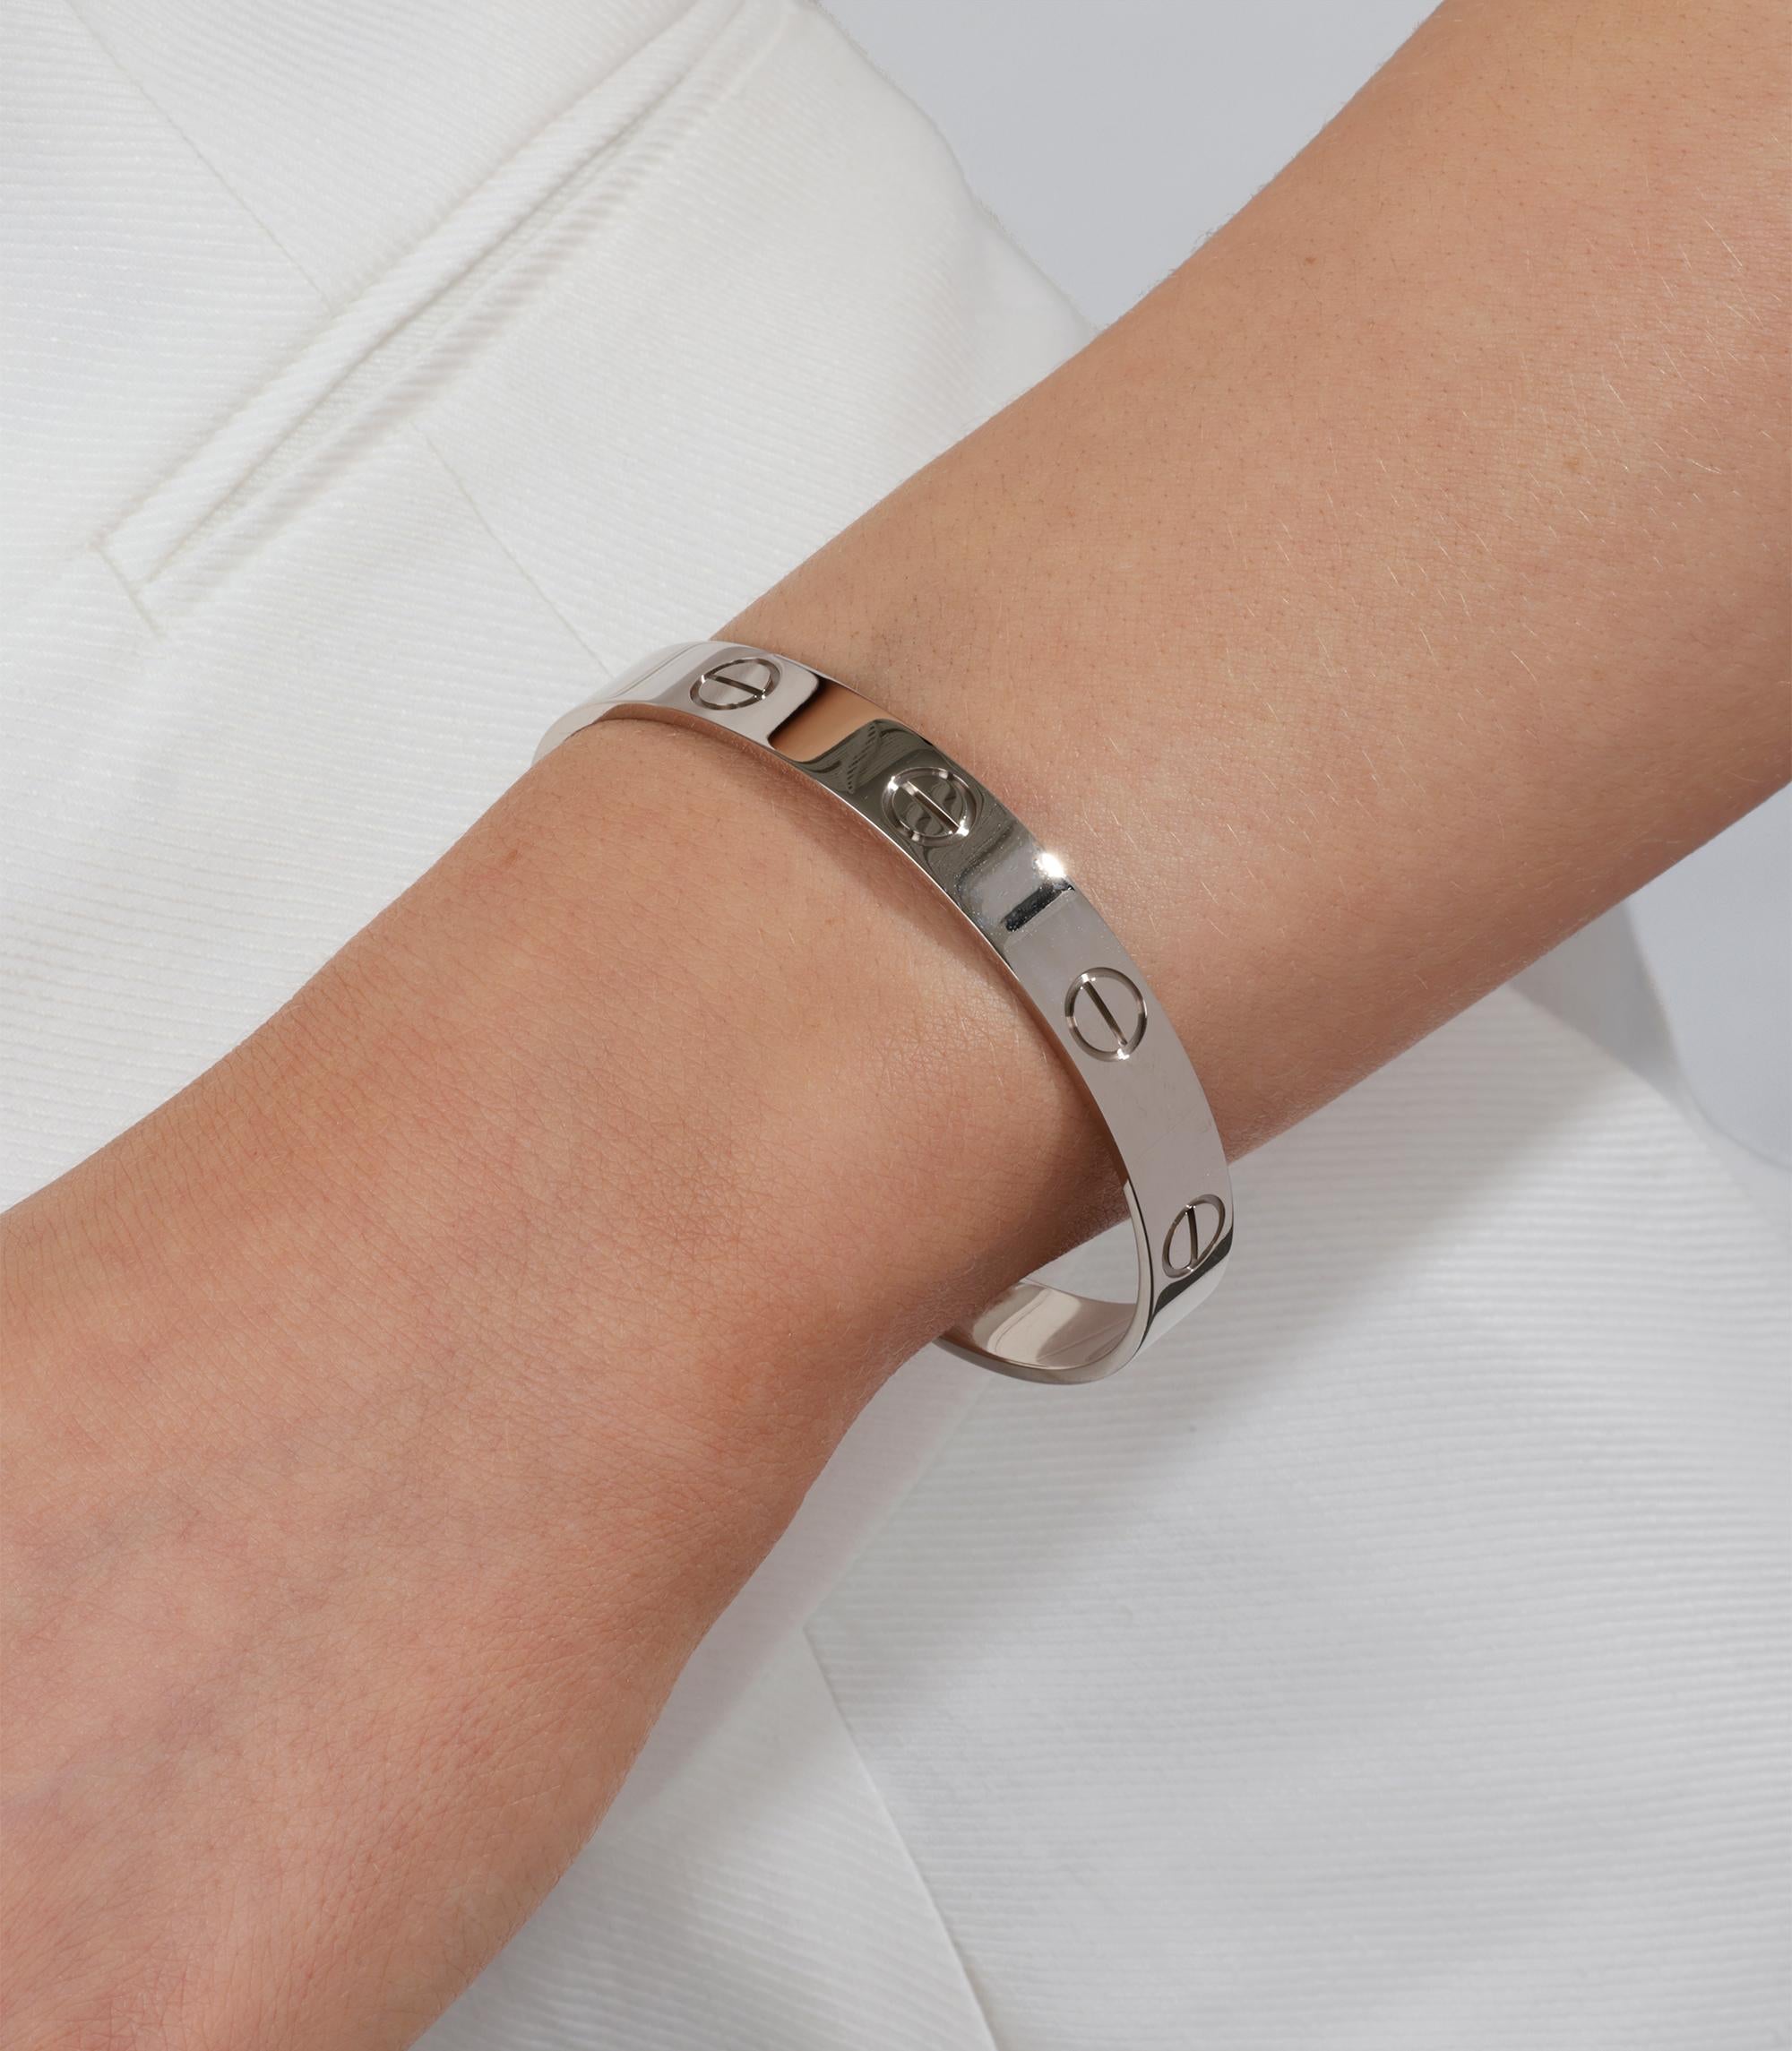 Cartier 18ct White Gold Love LM Cuff Bangle

Brand- Cartier
Model- Love LM Cuff Bangle
Product Type- Bracelet
Serial Number- IE****
Age- Circa 2019
Accompanied By- Cartier Box, Receipt
Material(s)- 18ct White Gold

Bracelet Length- 20cm
Bracelet